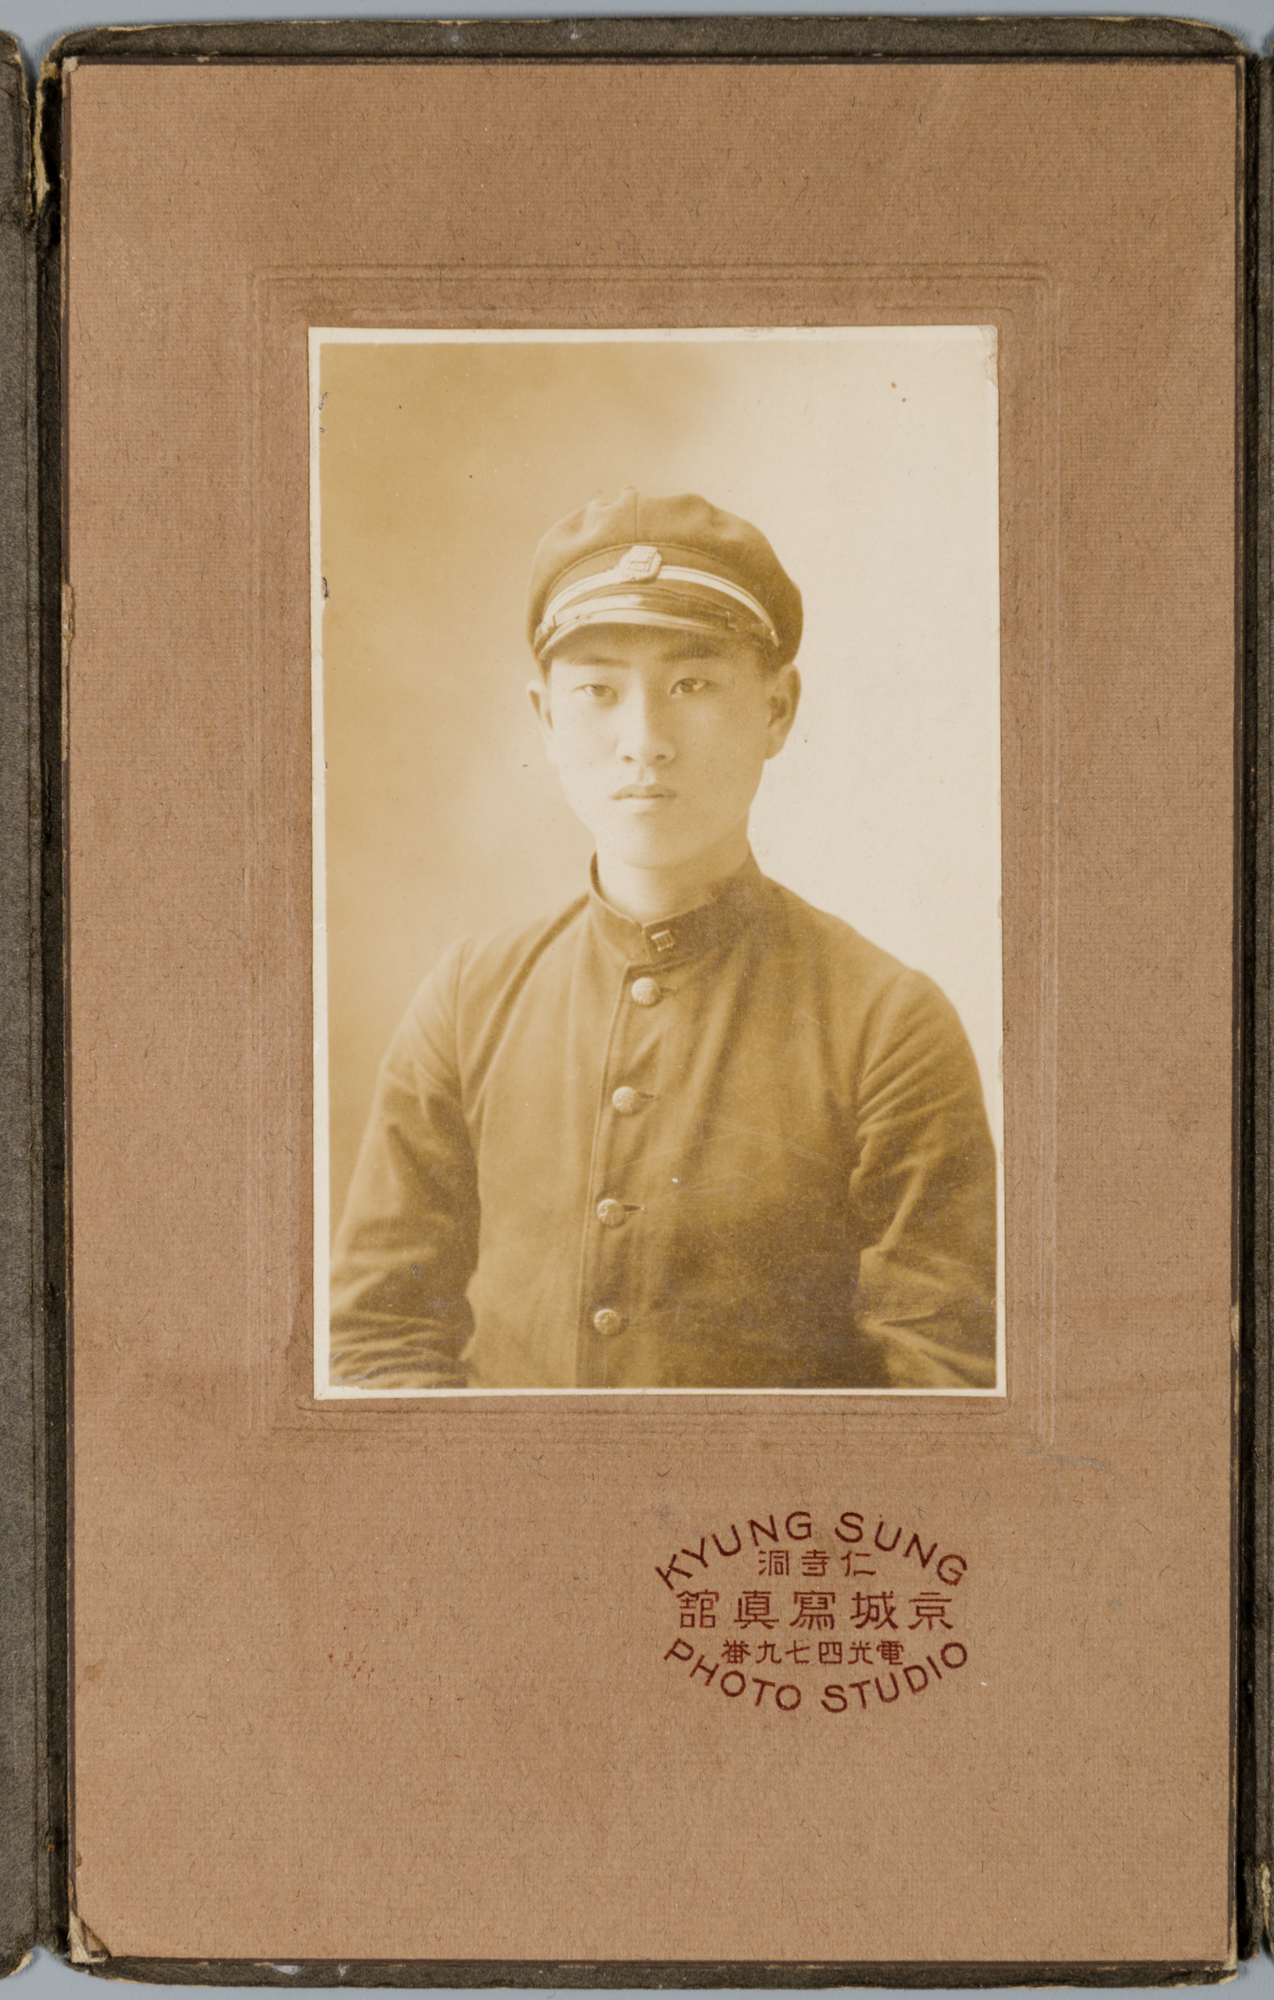 A portrait photo of a student taken at Kyung Sung Photo Studio in the 1920s (Research Institute of Photographic Archives)